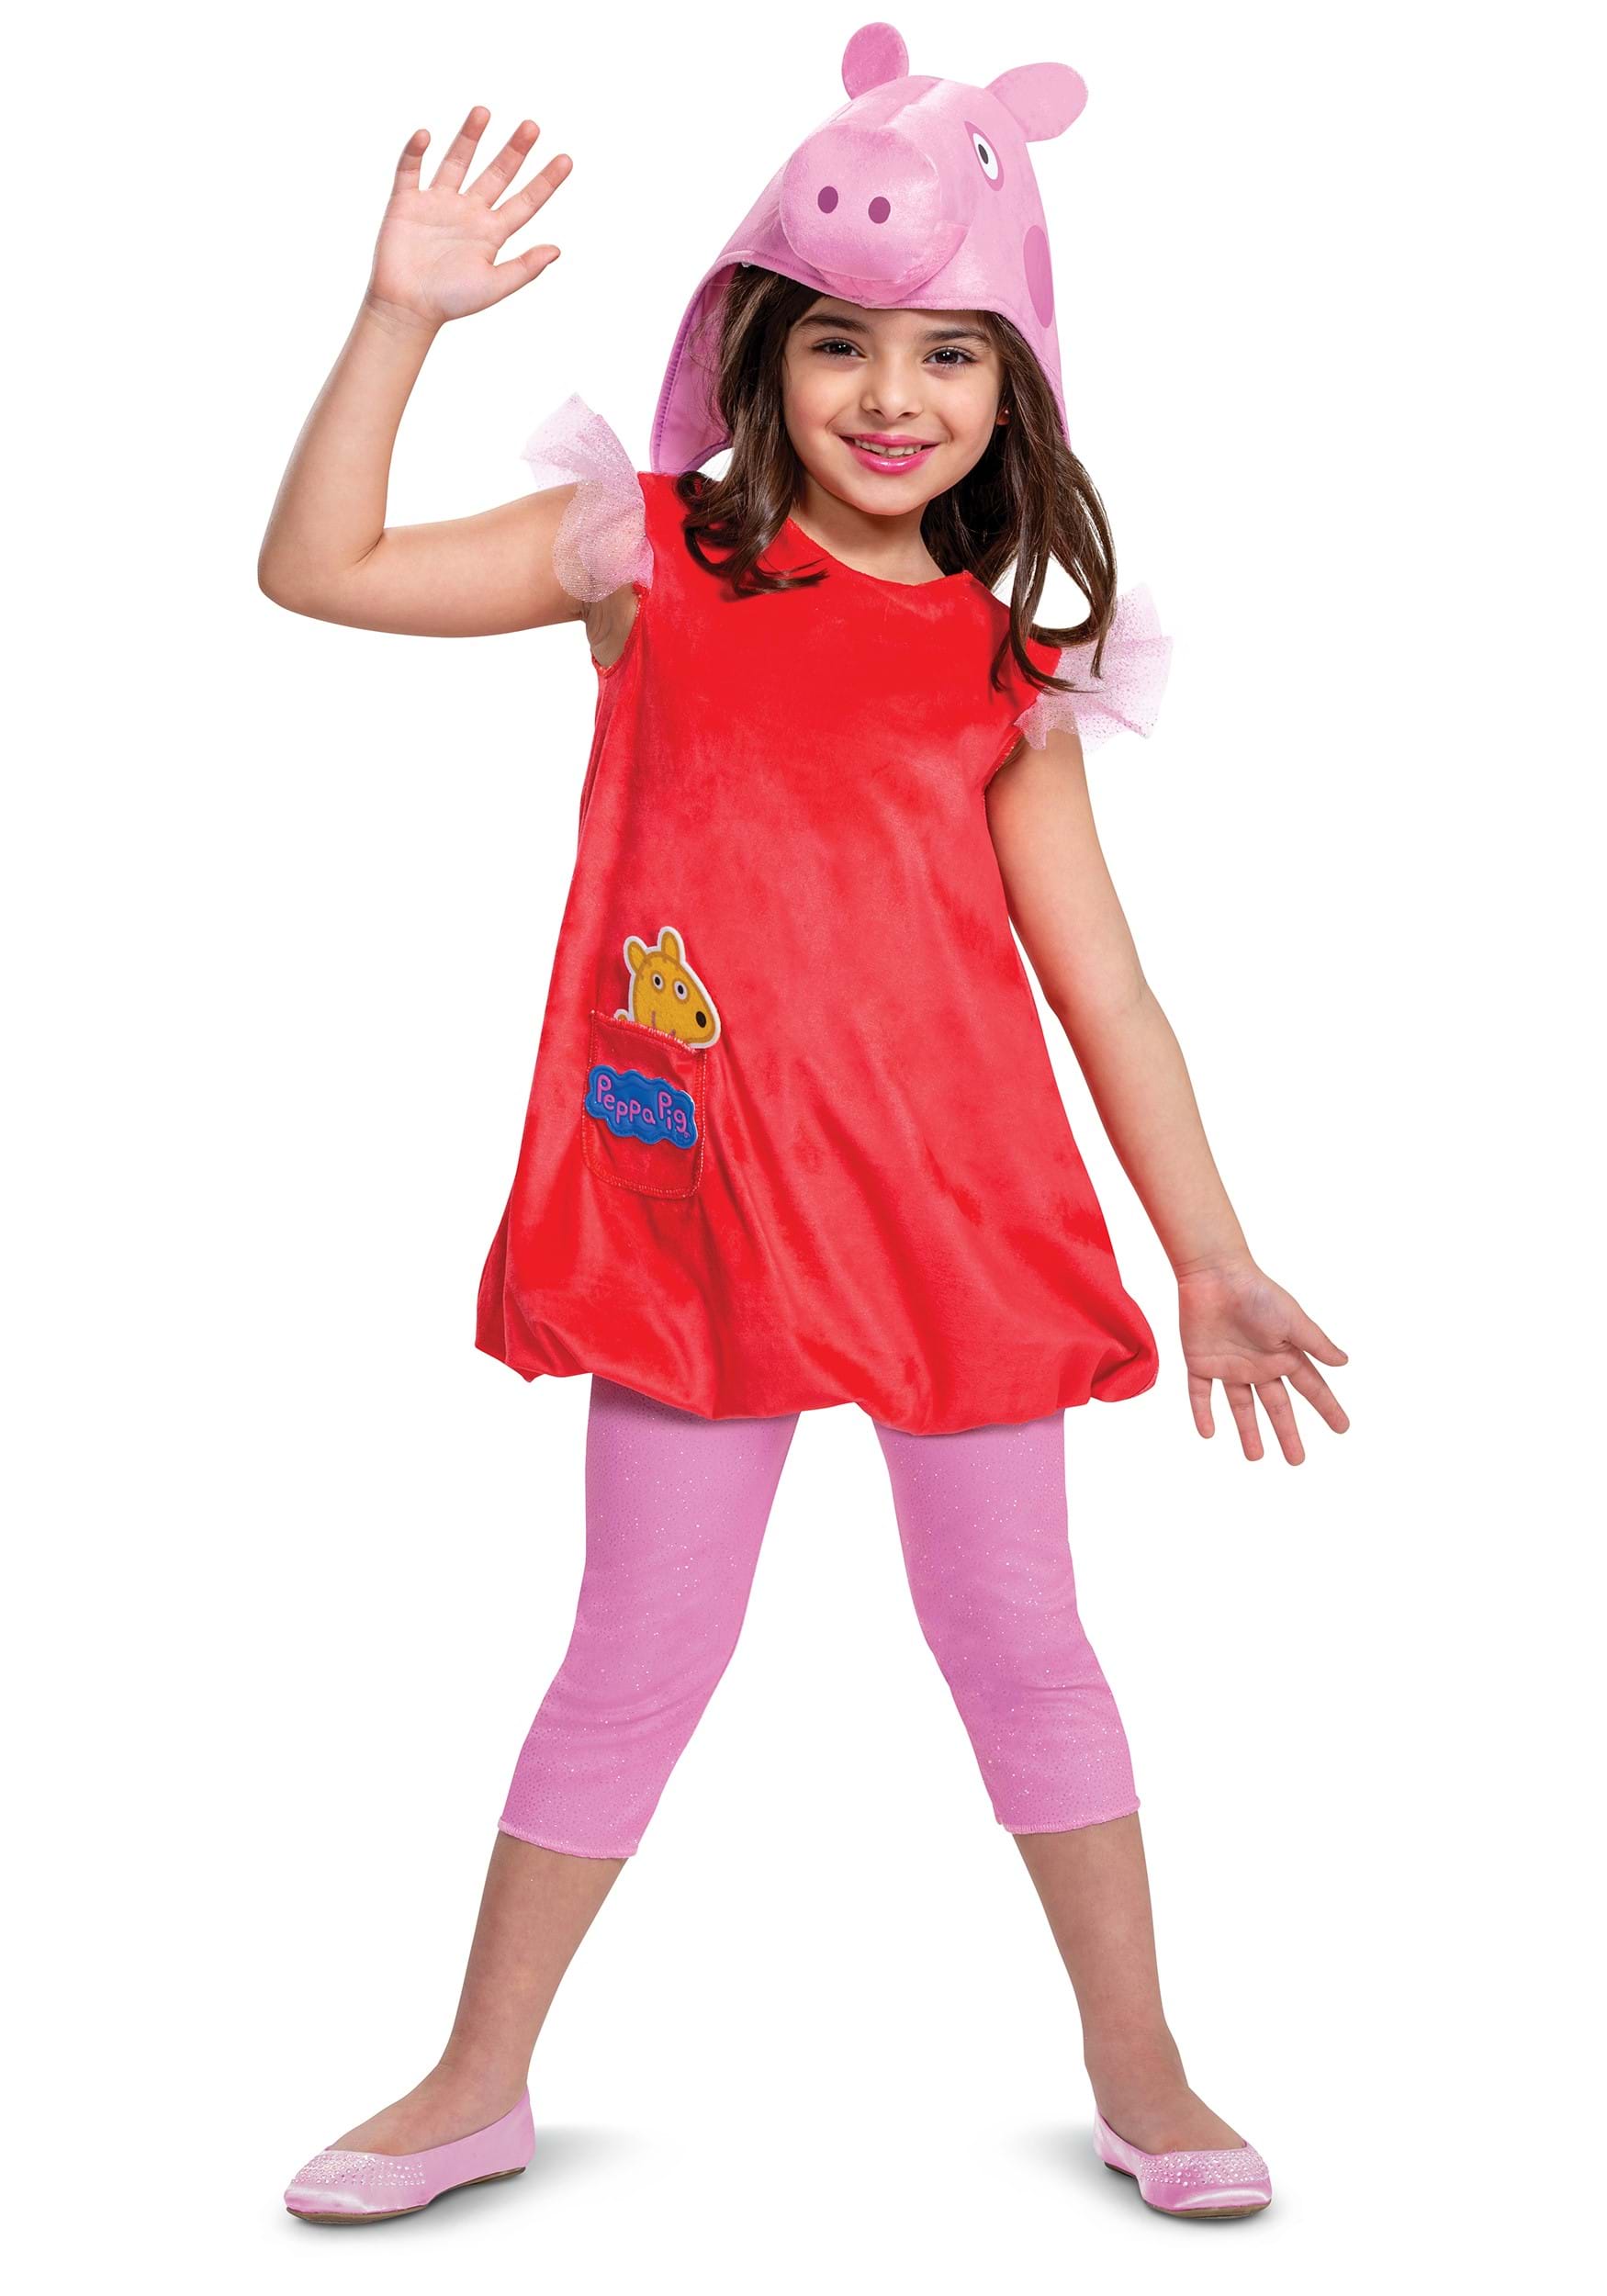 Photos - Fancy Dress Deluxe Disguise  Kid's Peppa Pig Costume Blue/Pink/Red DI116159 